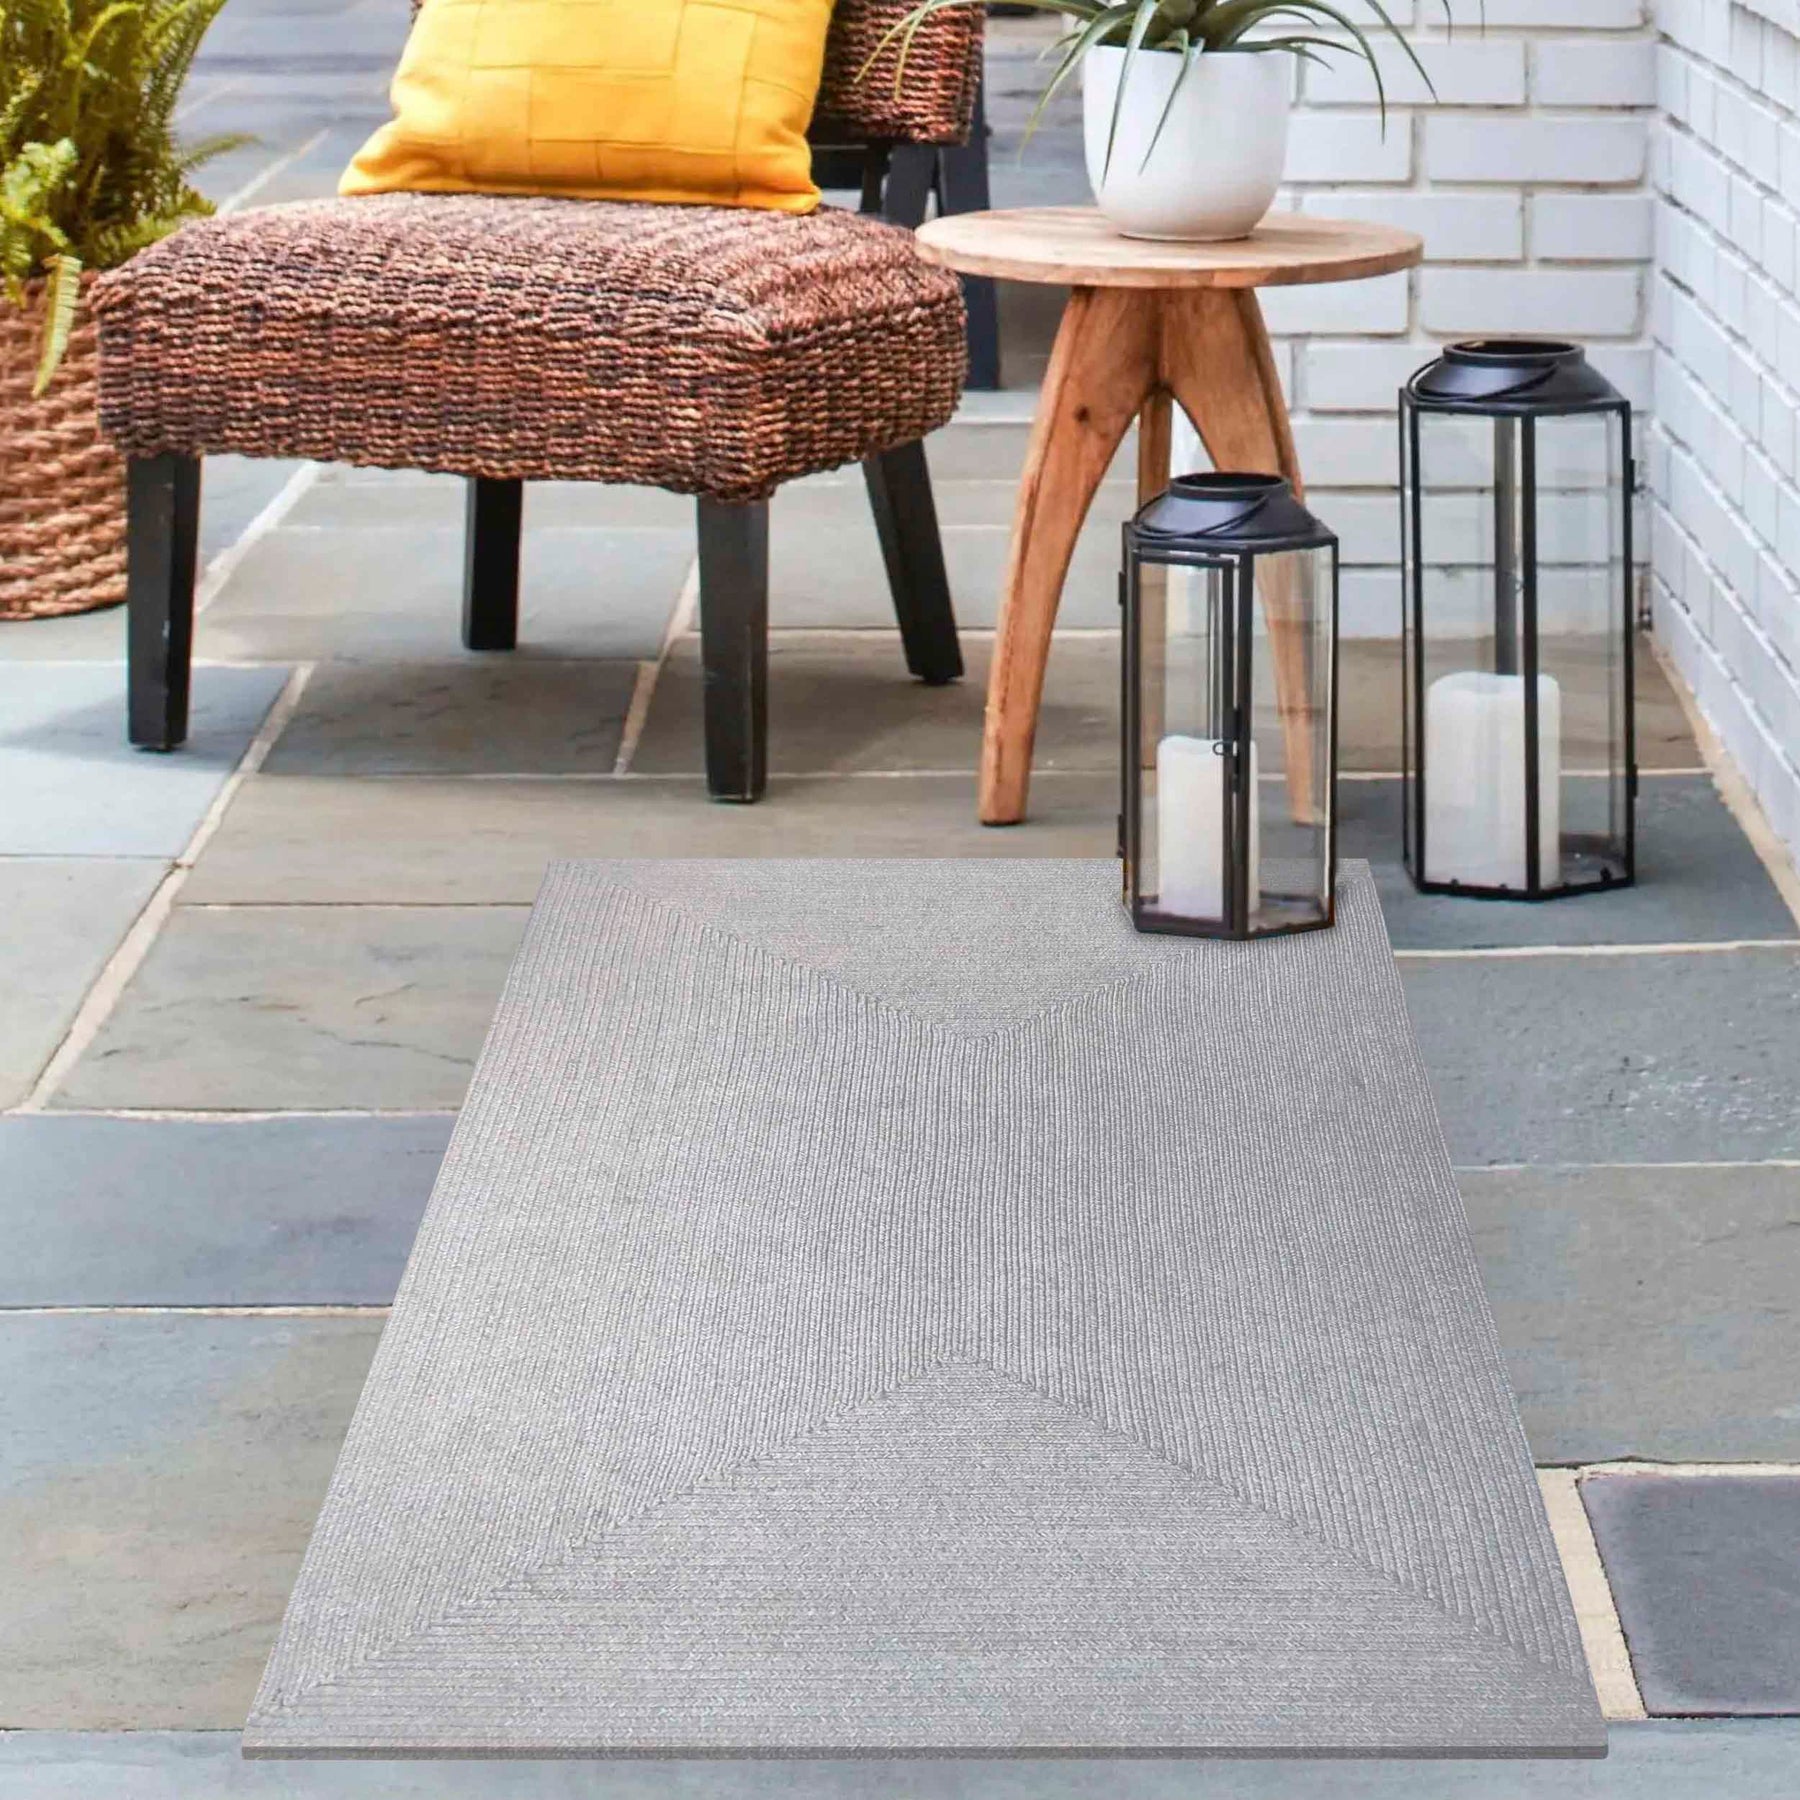 Bohemian Indoor Outdoor Rugs Solid Rectangle Braided Area Rug - Slate